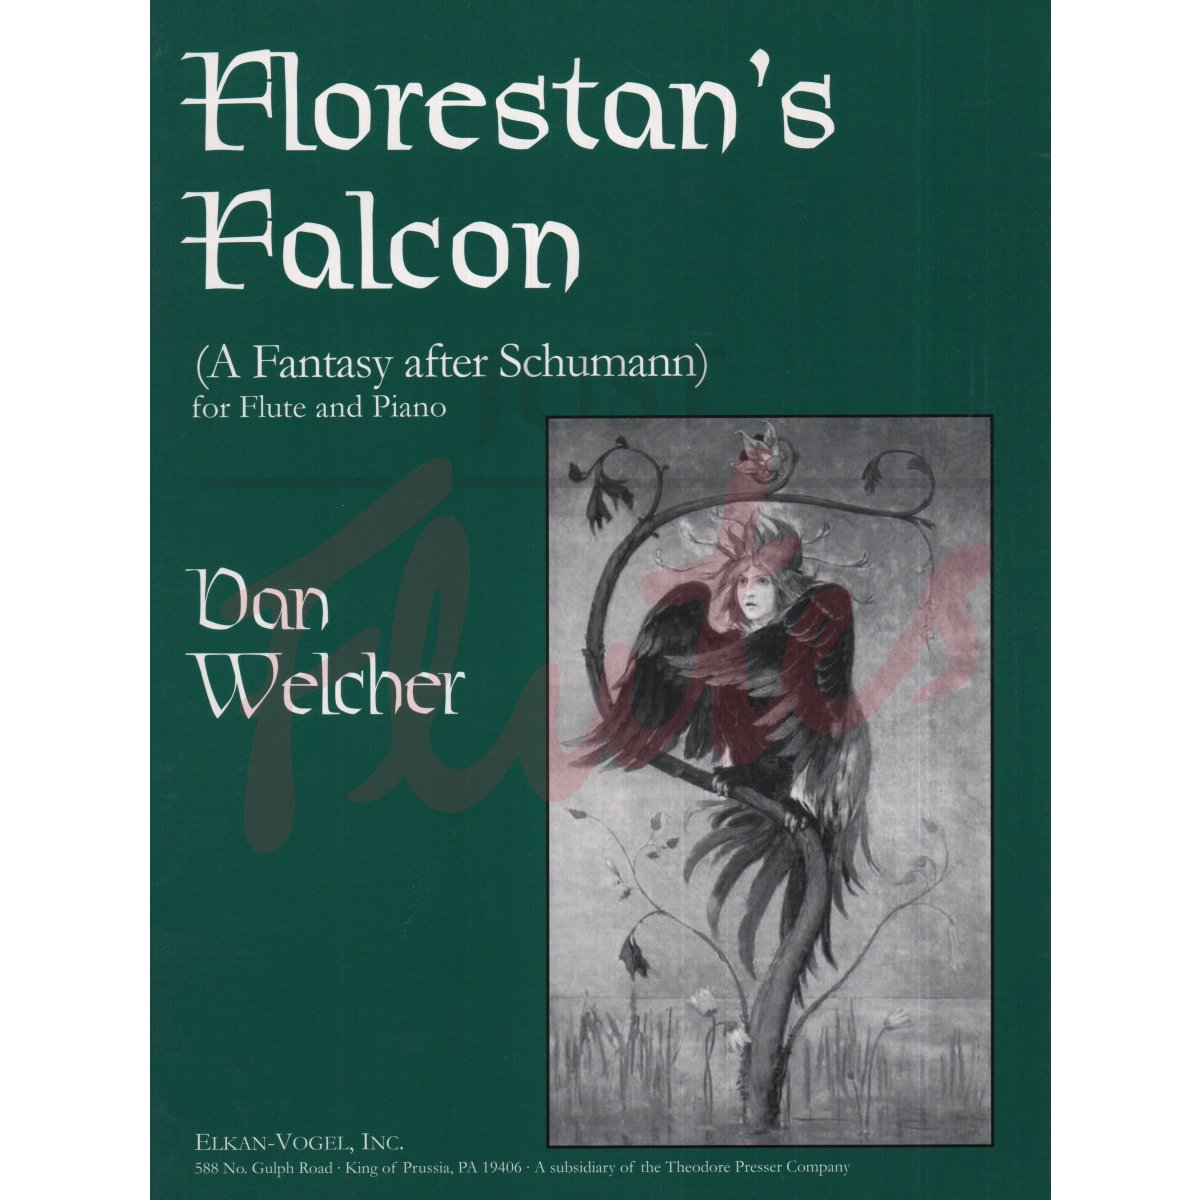 Florestan's Falcon (A Fantasy after Schumann) for Flute and Piano